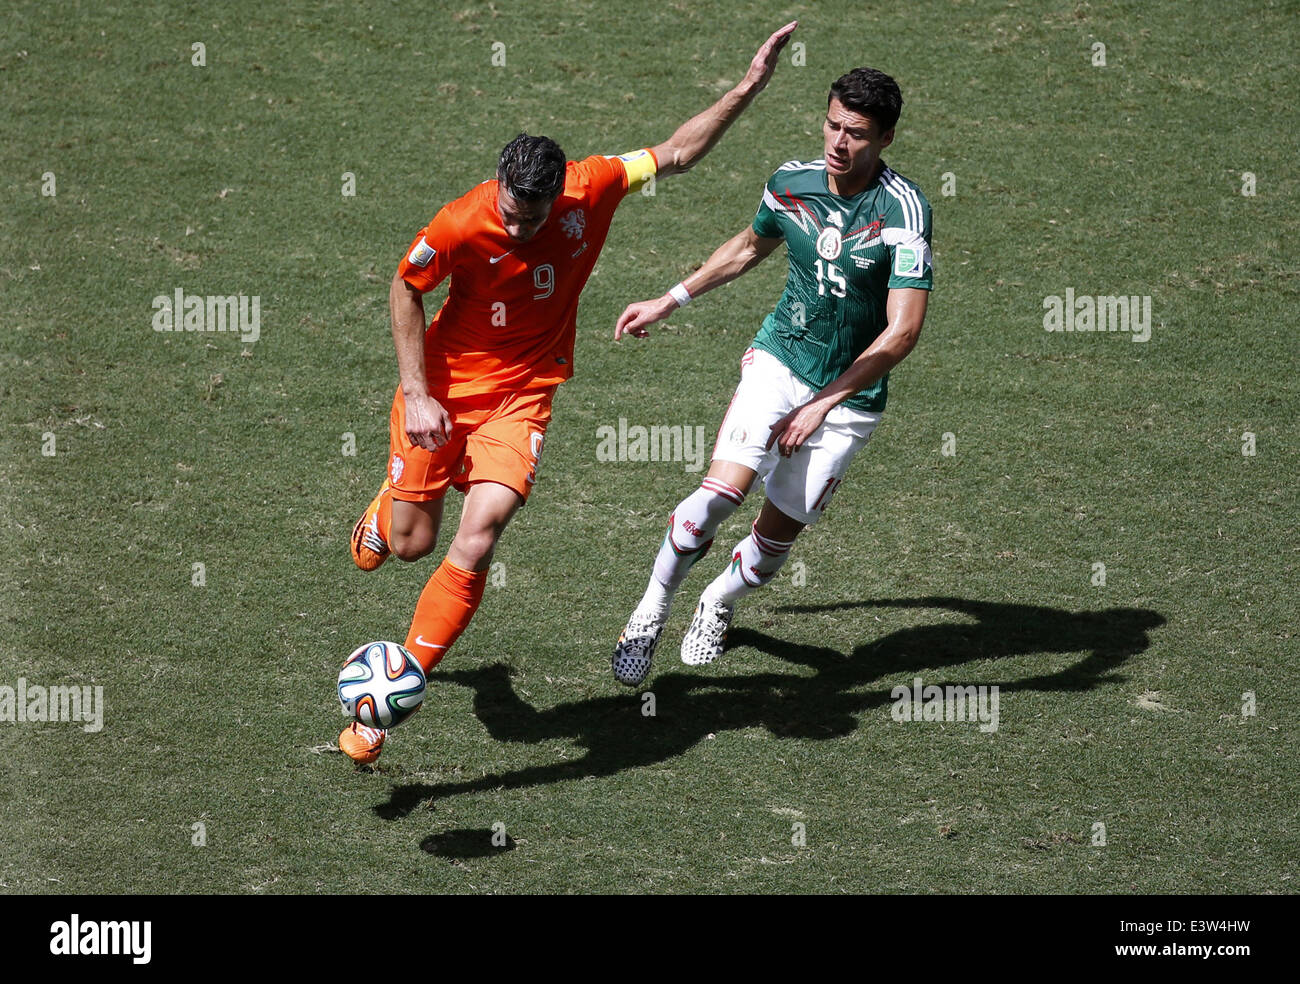 Fortaleza, Brazil. 29th June, 2014. Netherlands' Robin van Persie vies with Mexico's Hector Moreno during a Round of 16 match between Netherlands and Mexico of 2014 FIFA World Cup at the Estadio Castelao Stadium in Fortaleza, Brazil, on June 29, 2014. Credit:  Liao Yujie/Xinhua/Alamy Live News Stock Photo